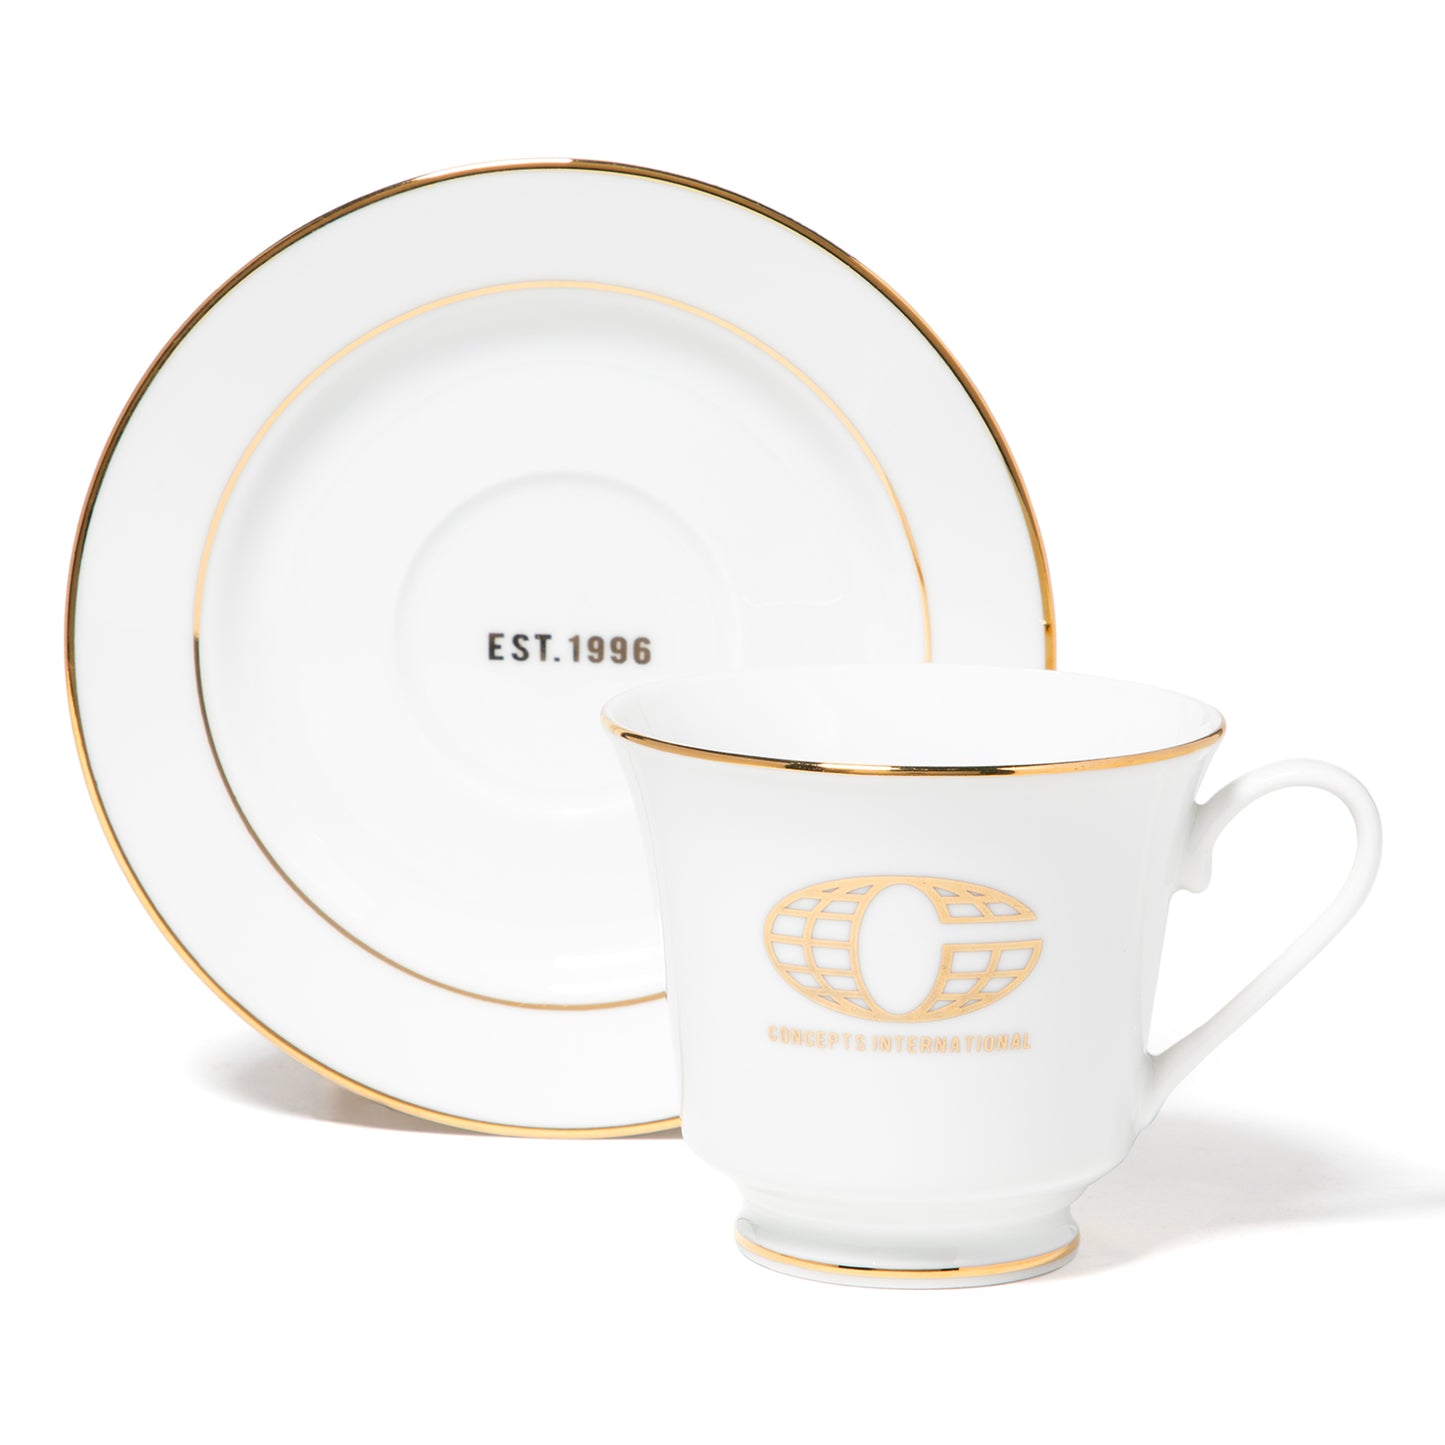 Concepts INTL Teacup & Saucer (White/Gold)